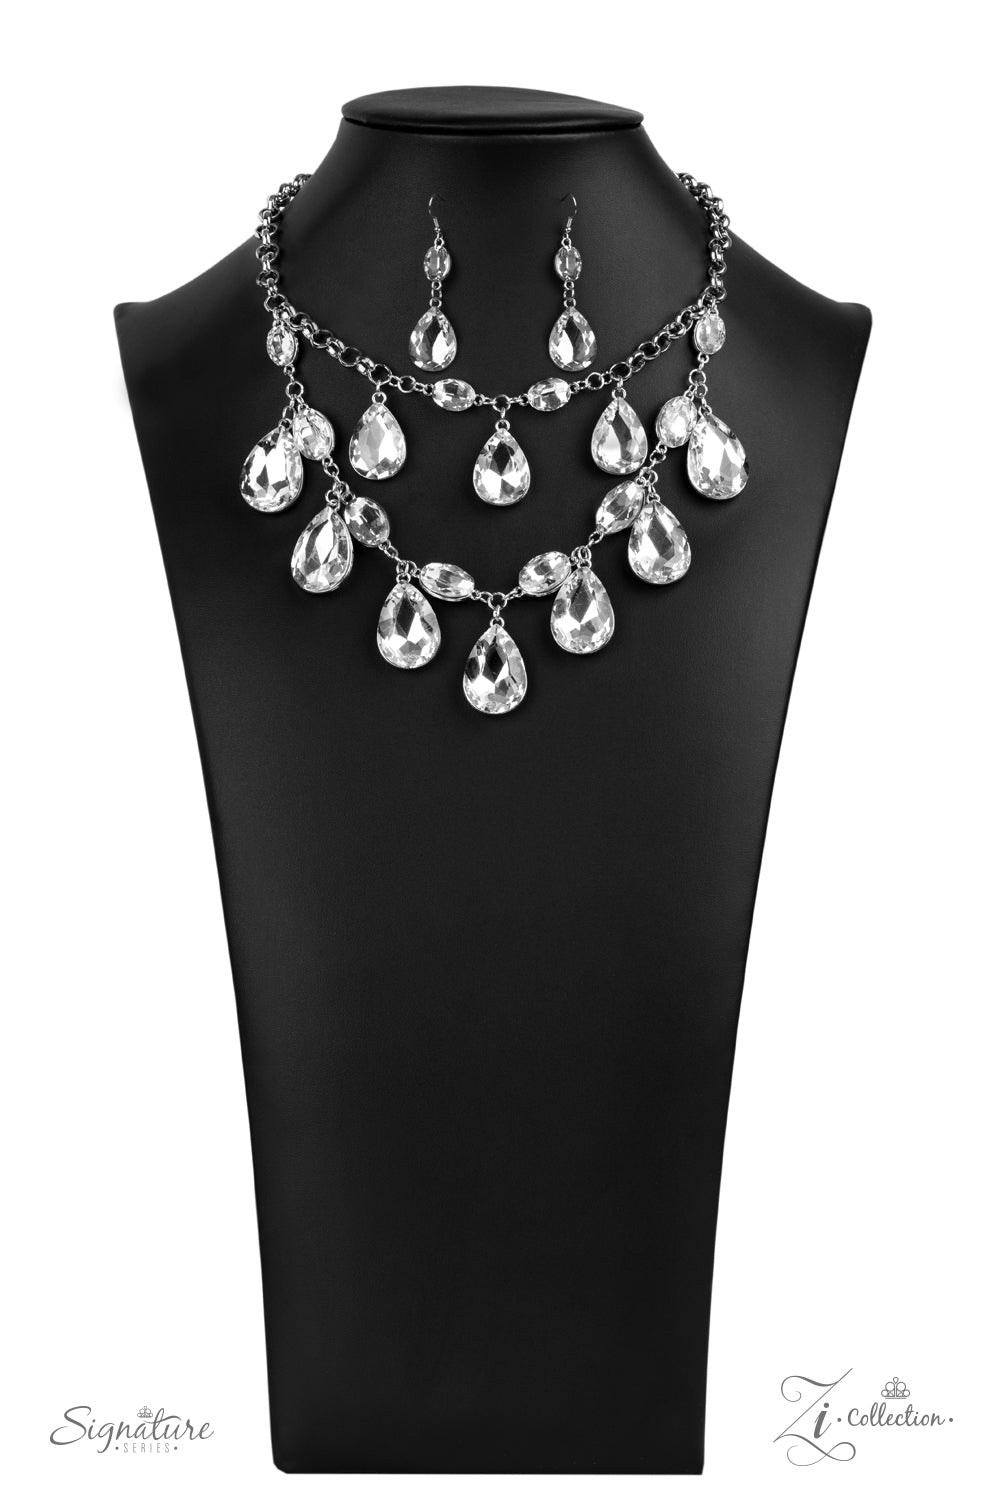 Paparazzi Accessories - The Sarah Zi Collection 2020 Necklace